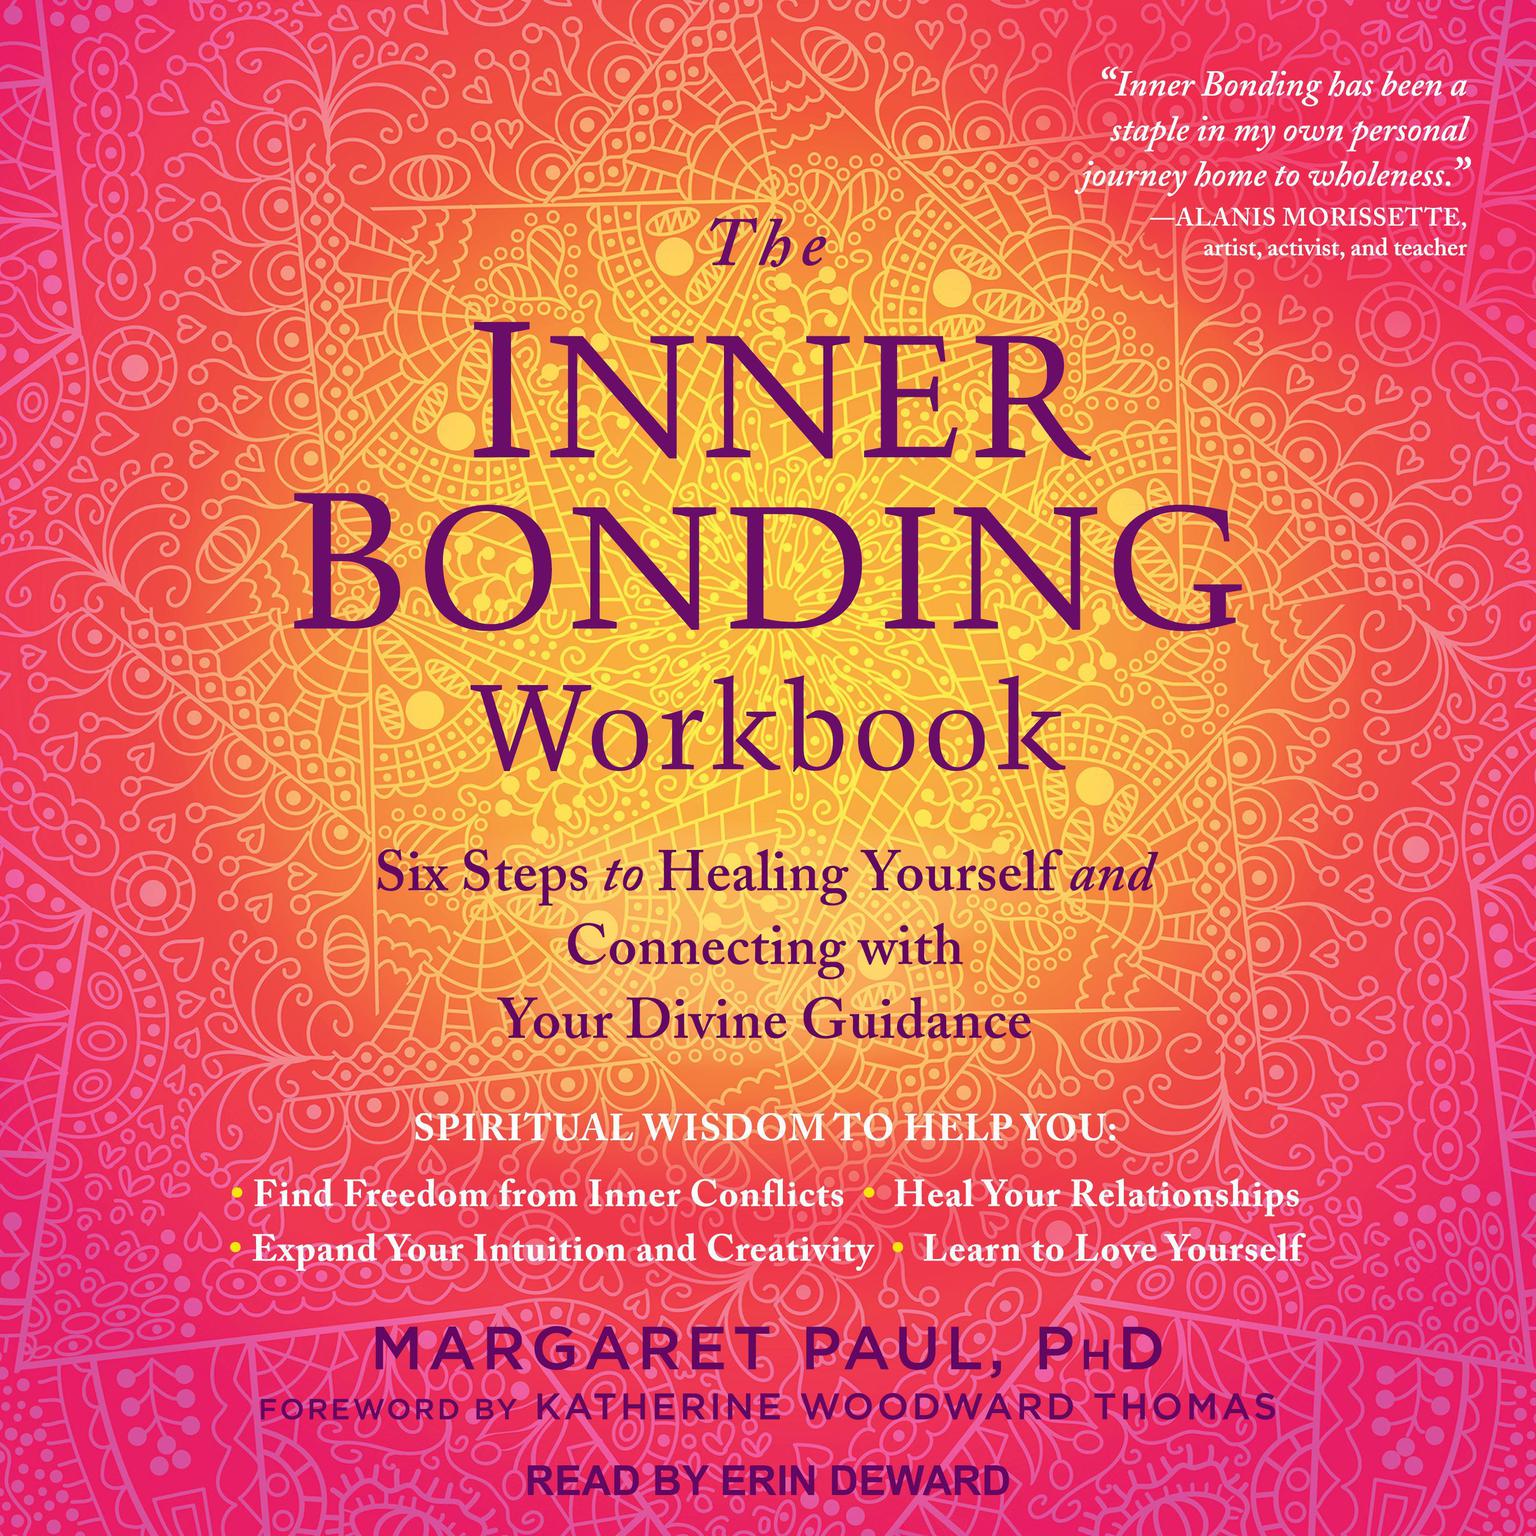 The Inner Bonding Workbook: Six Steps to Healing Yourself and Connecting with Your Divine Guidance Audiobook, by Margaret Paul, Ph.D.